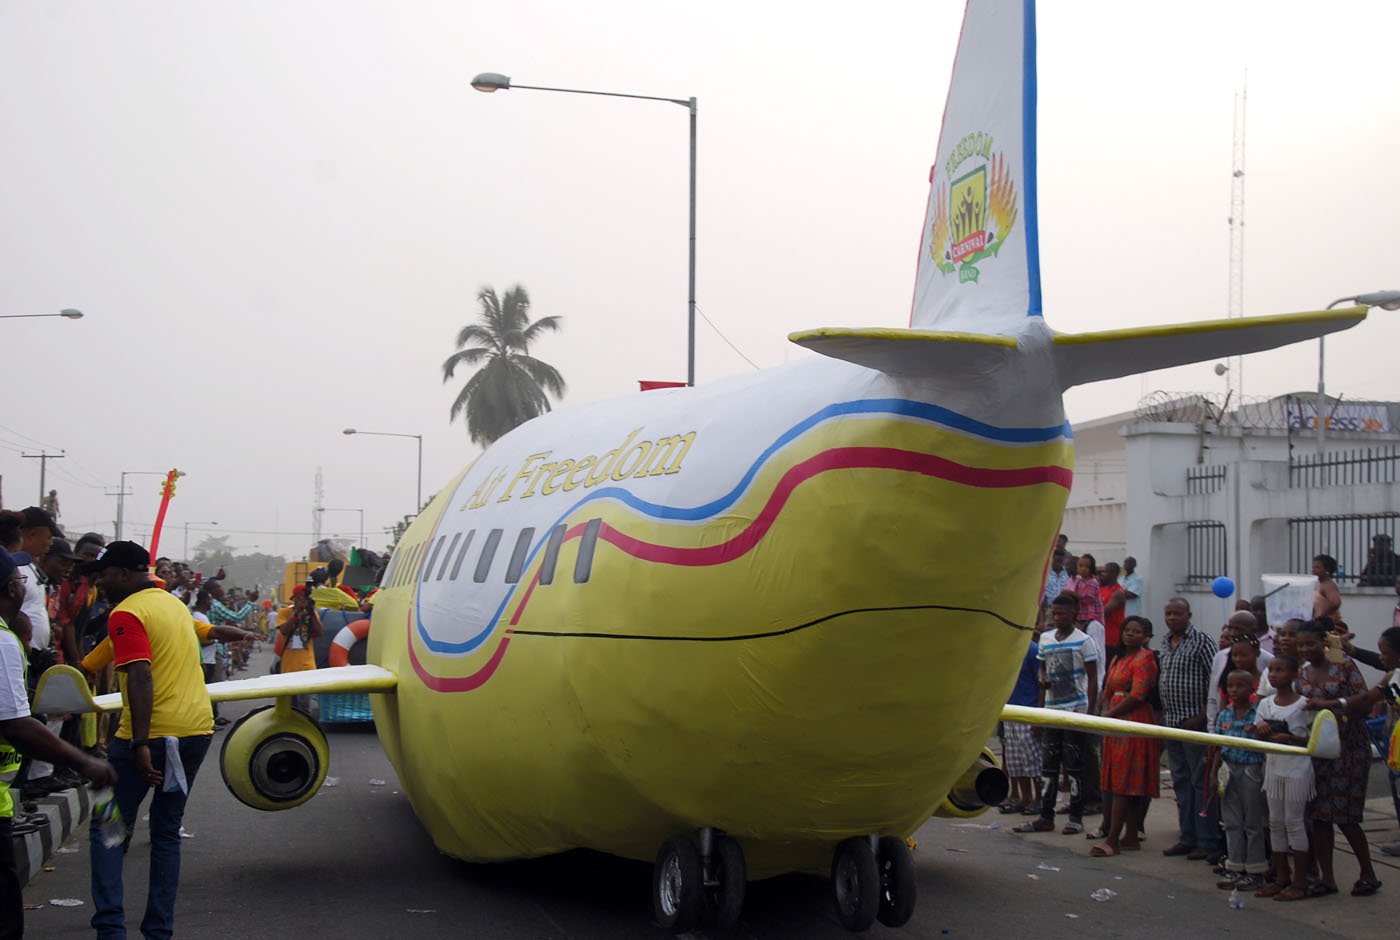 A Dummy Aircraft designed by Freedom Band during the Main Event of the 2017 Carnival Calabar in Cross River State Yesterday. Photo: Nwankpa Chijioke